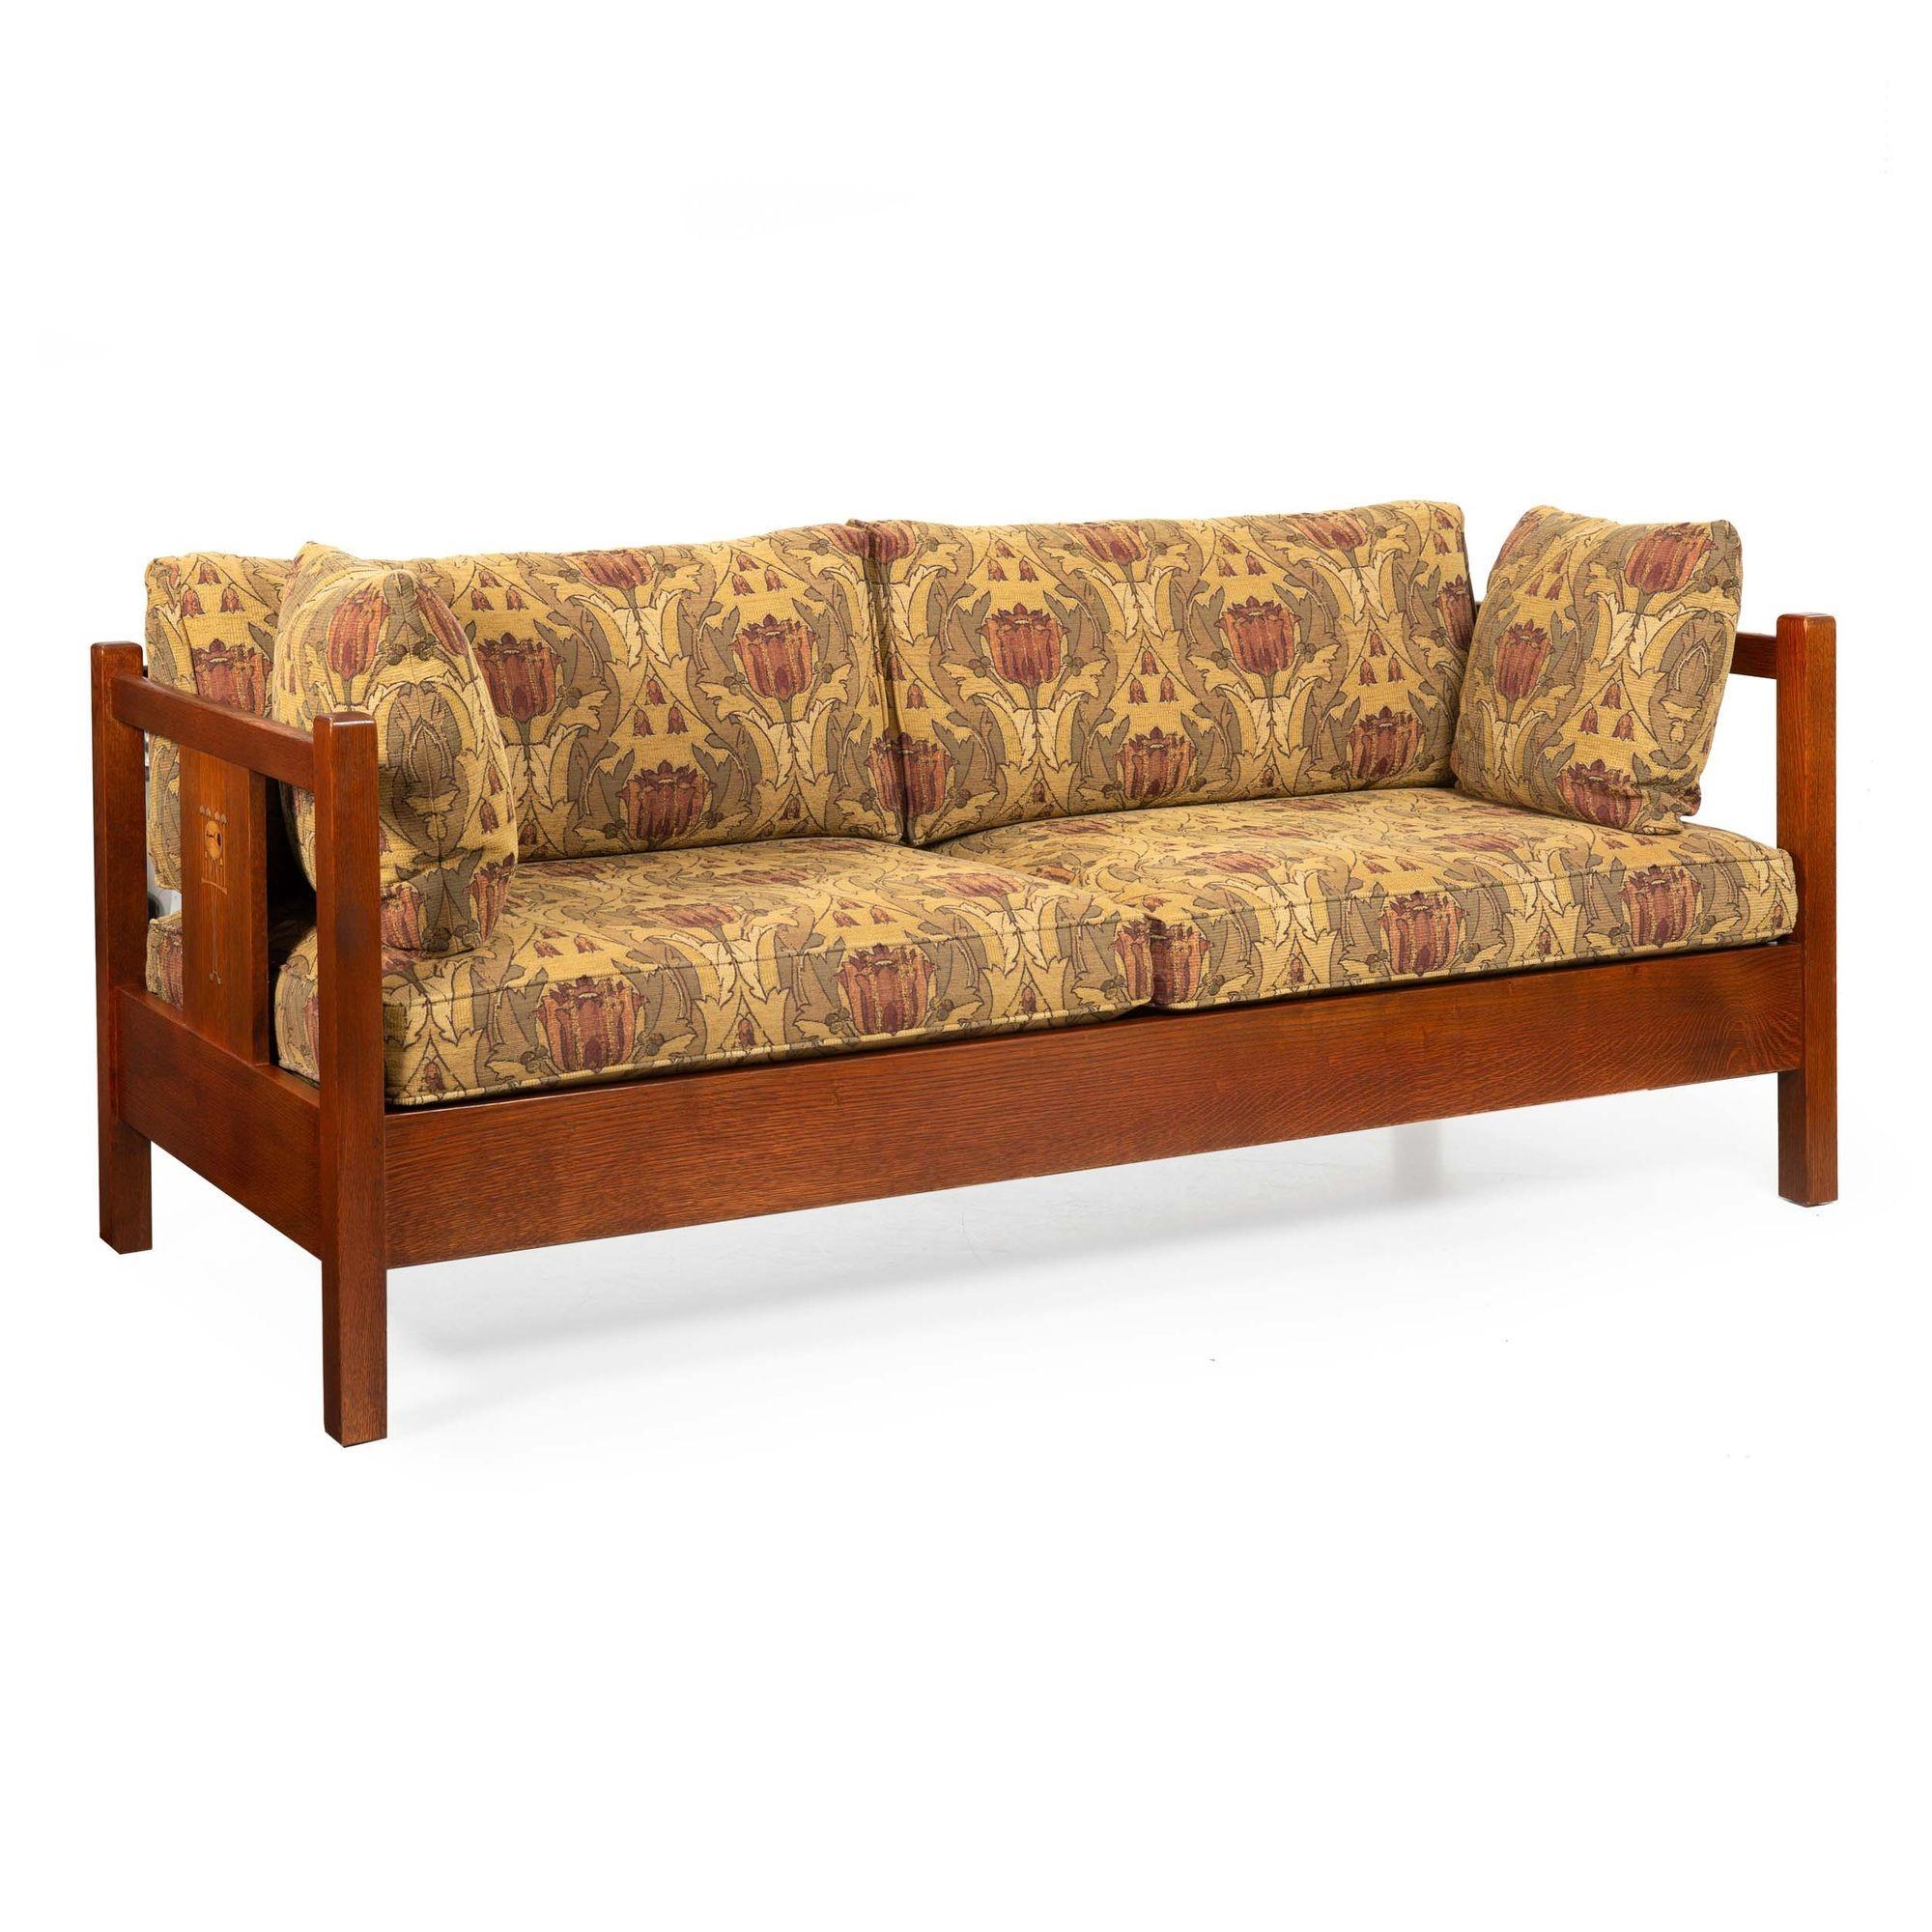 A very finely crafted and beautifully inlaid solid oak sofa by Stickley from their Harvey Ellis Collection, it retains the original upholstery which overall appears almost to be unused. The oak retains a gorgeous overall glow and the surface is